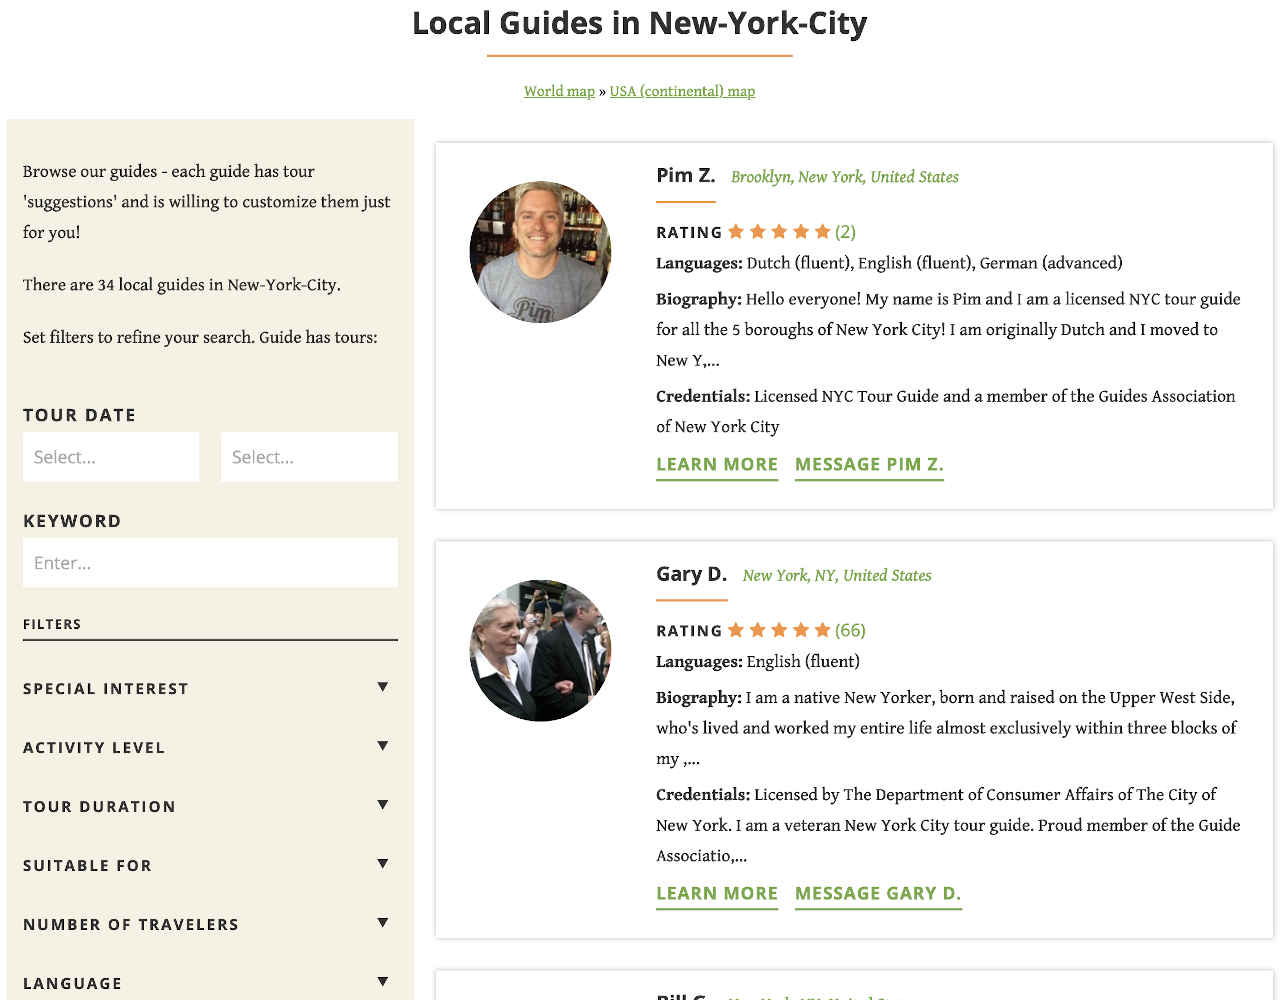 NYC Local Guides Landing Page